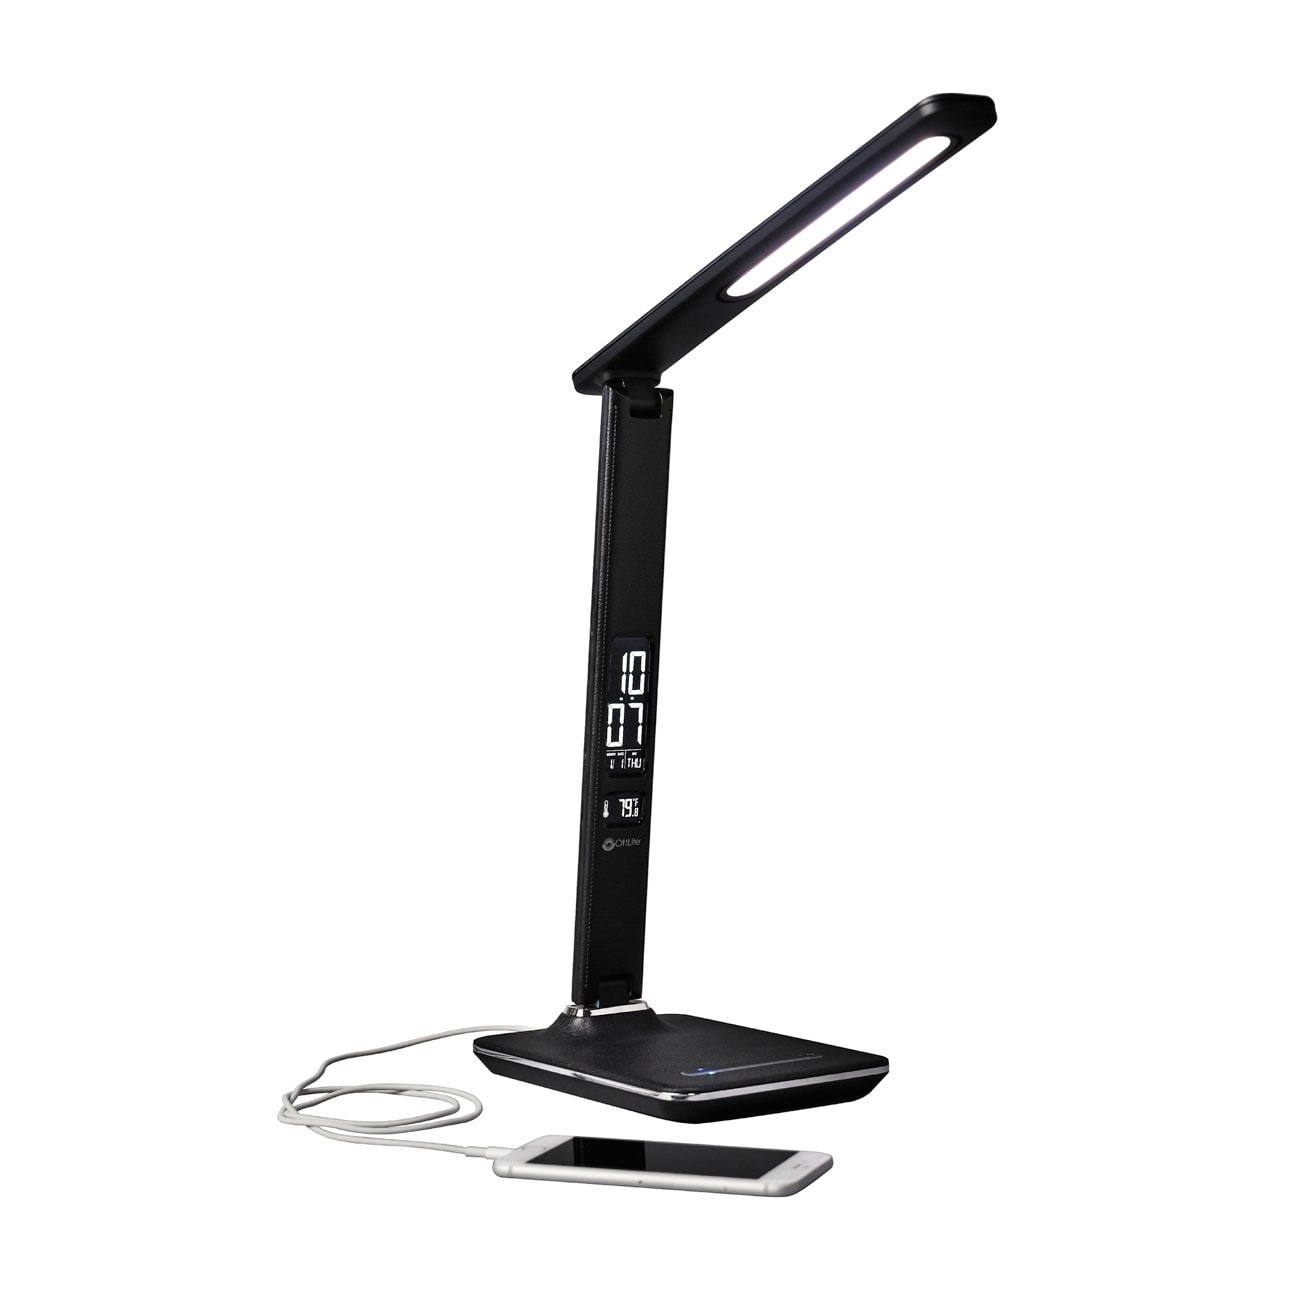 Ottlite Executive White Desk Lamp with 2.1A USB Charging Port